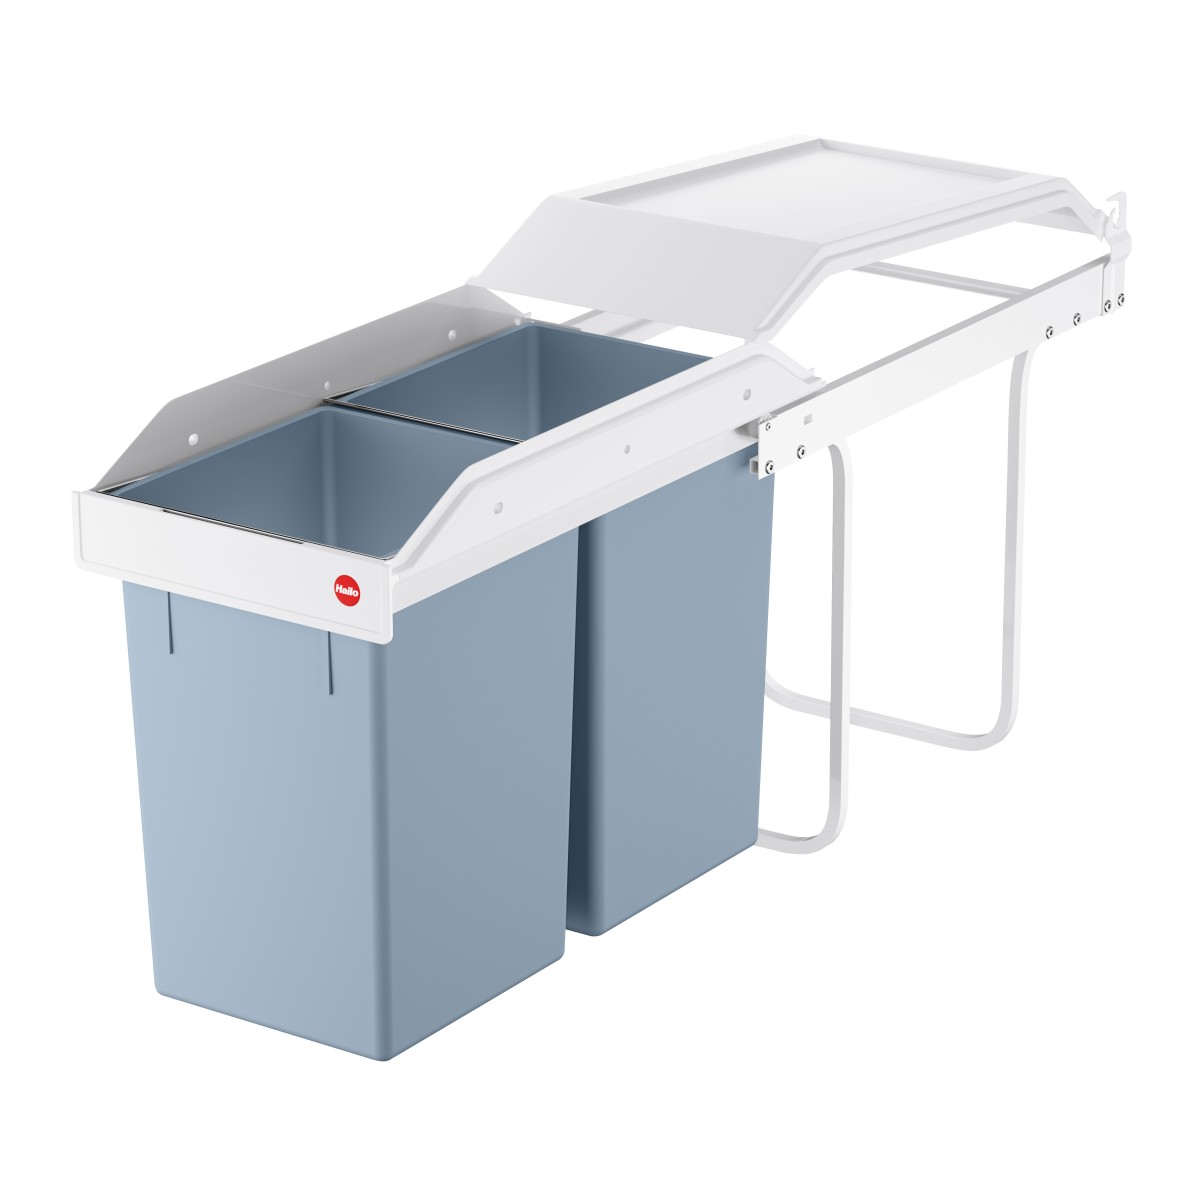 Waste Bin Hailo Mounting Waste Collectors 3 Bin 3 compartment space pair Tandem-s-3 